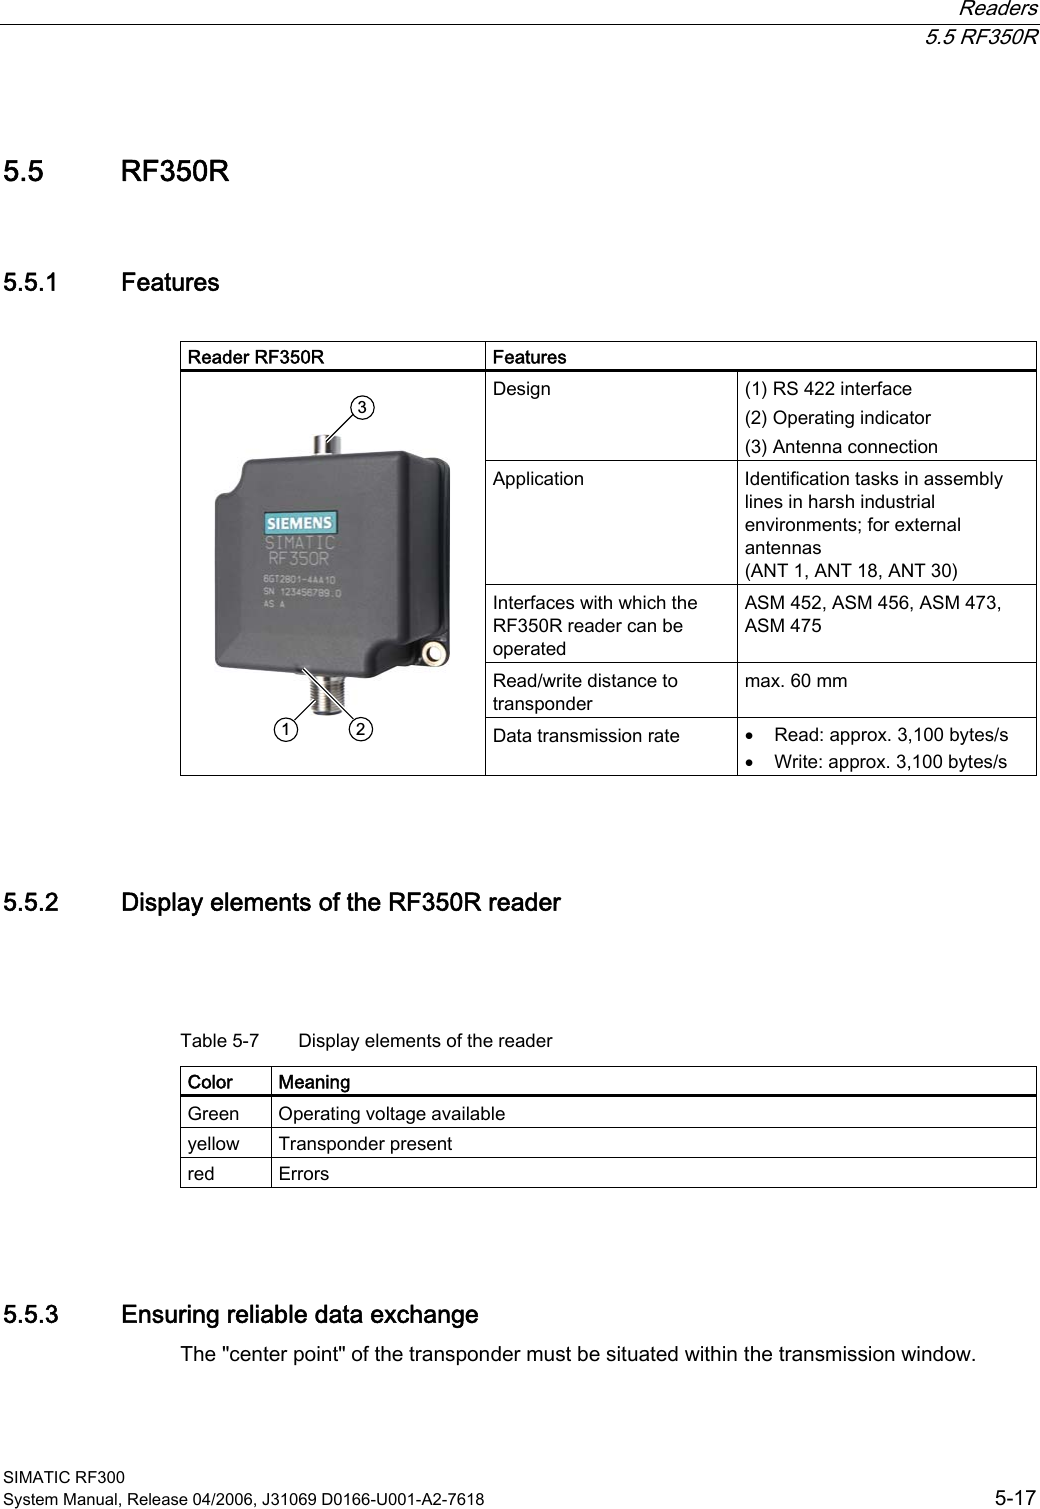  Readers  5.5 RF350R SIMATIC RF300 System Manual, Release 04/2006, J31069 D0166-U001-A2-7618  5-17 5.5 5.5 RF350R 5.5.1  Features  Reader RF350R  Features Design  (1) RS 422 interface (2) Operating indicator (3) Antenna connection Application  Identification tasks in assembly lines in harsh industrial environments; for external antennas (ANT 1, ANT 18, ANT 30) Interfaces with which the RF350R reader can be operated ASM 452, ASM 456, ASM 473, ASM 475 Read/write distance to transponder max. 60 mm    Data transmission rate  • Read: approx. 3,100 bytes/s • Write: approx. 3,100 bytes/s  5.5.2  Display elements of the RF350R reader  Table 5-7  Display elements of the reader Color  Meaning Green  Operating voltage available yellow  Transponder present red  Errors  5.5.3  Ensuring reliable data exchange The &quot;center point&quot; of the transponder must be situated within the transmission window. 